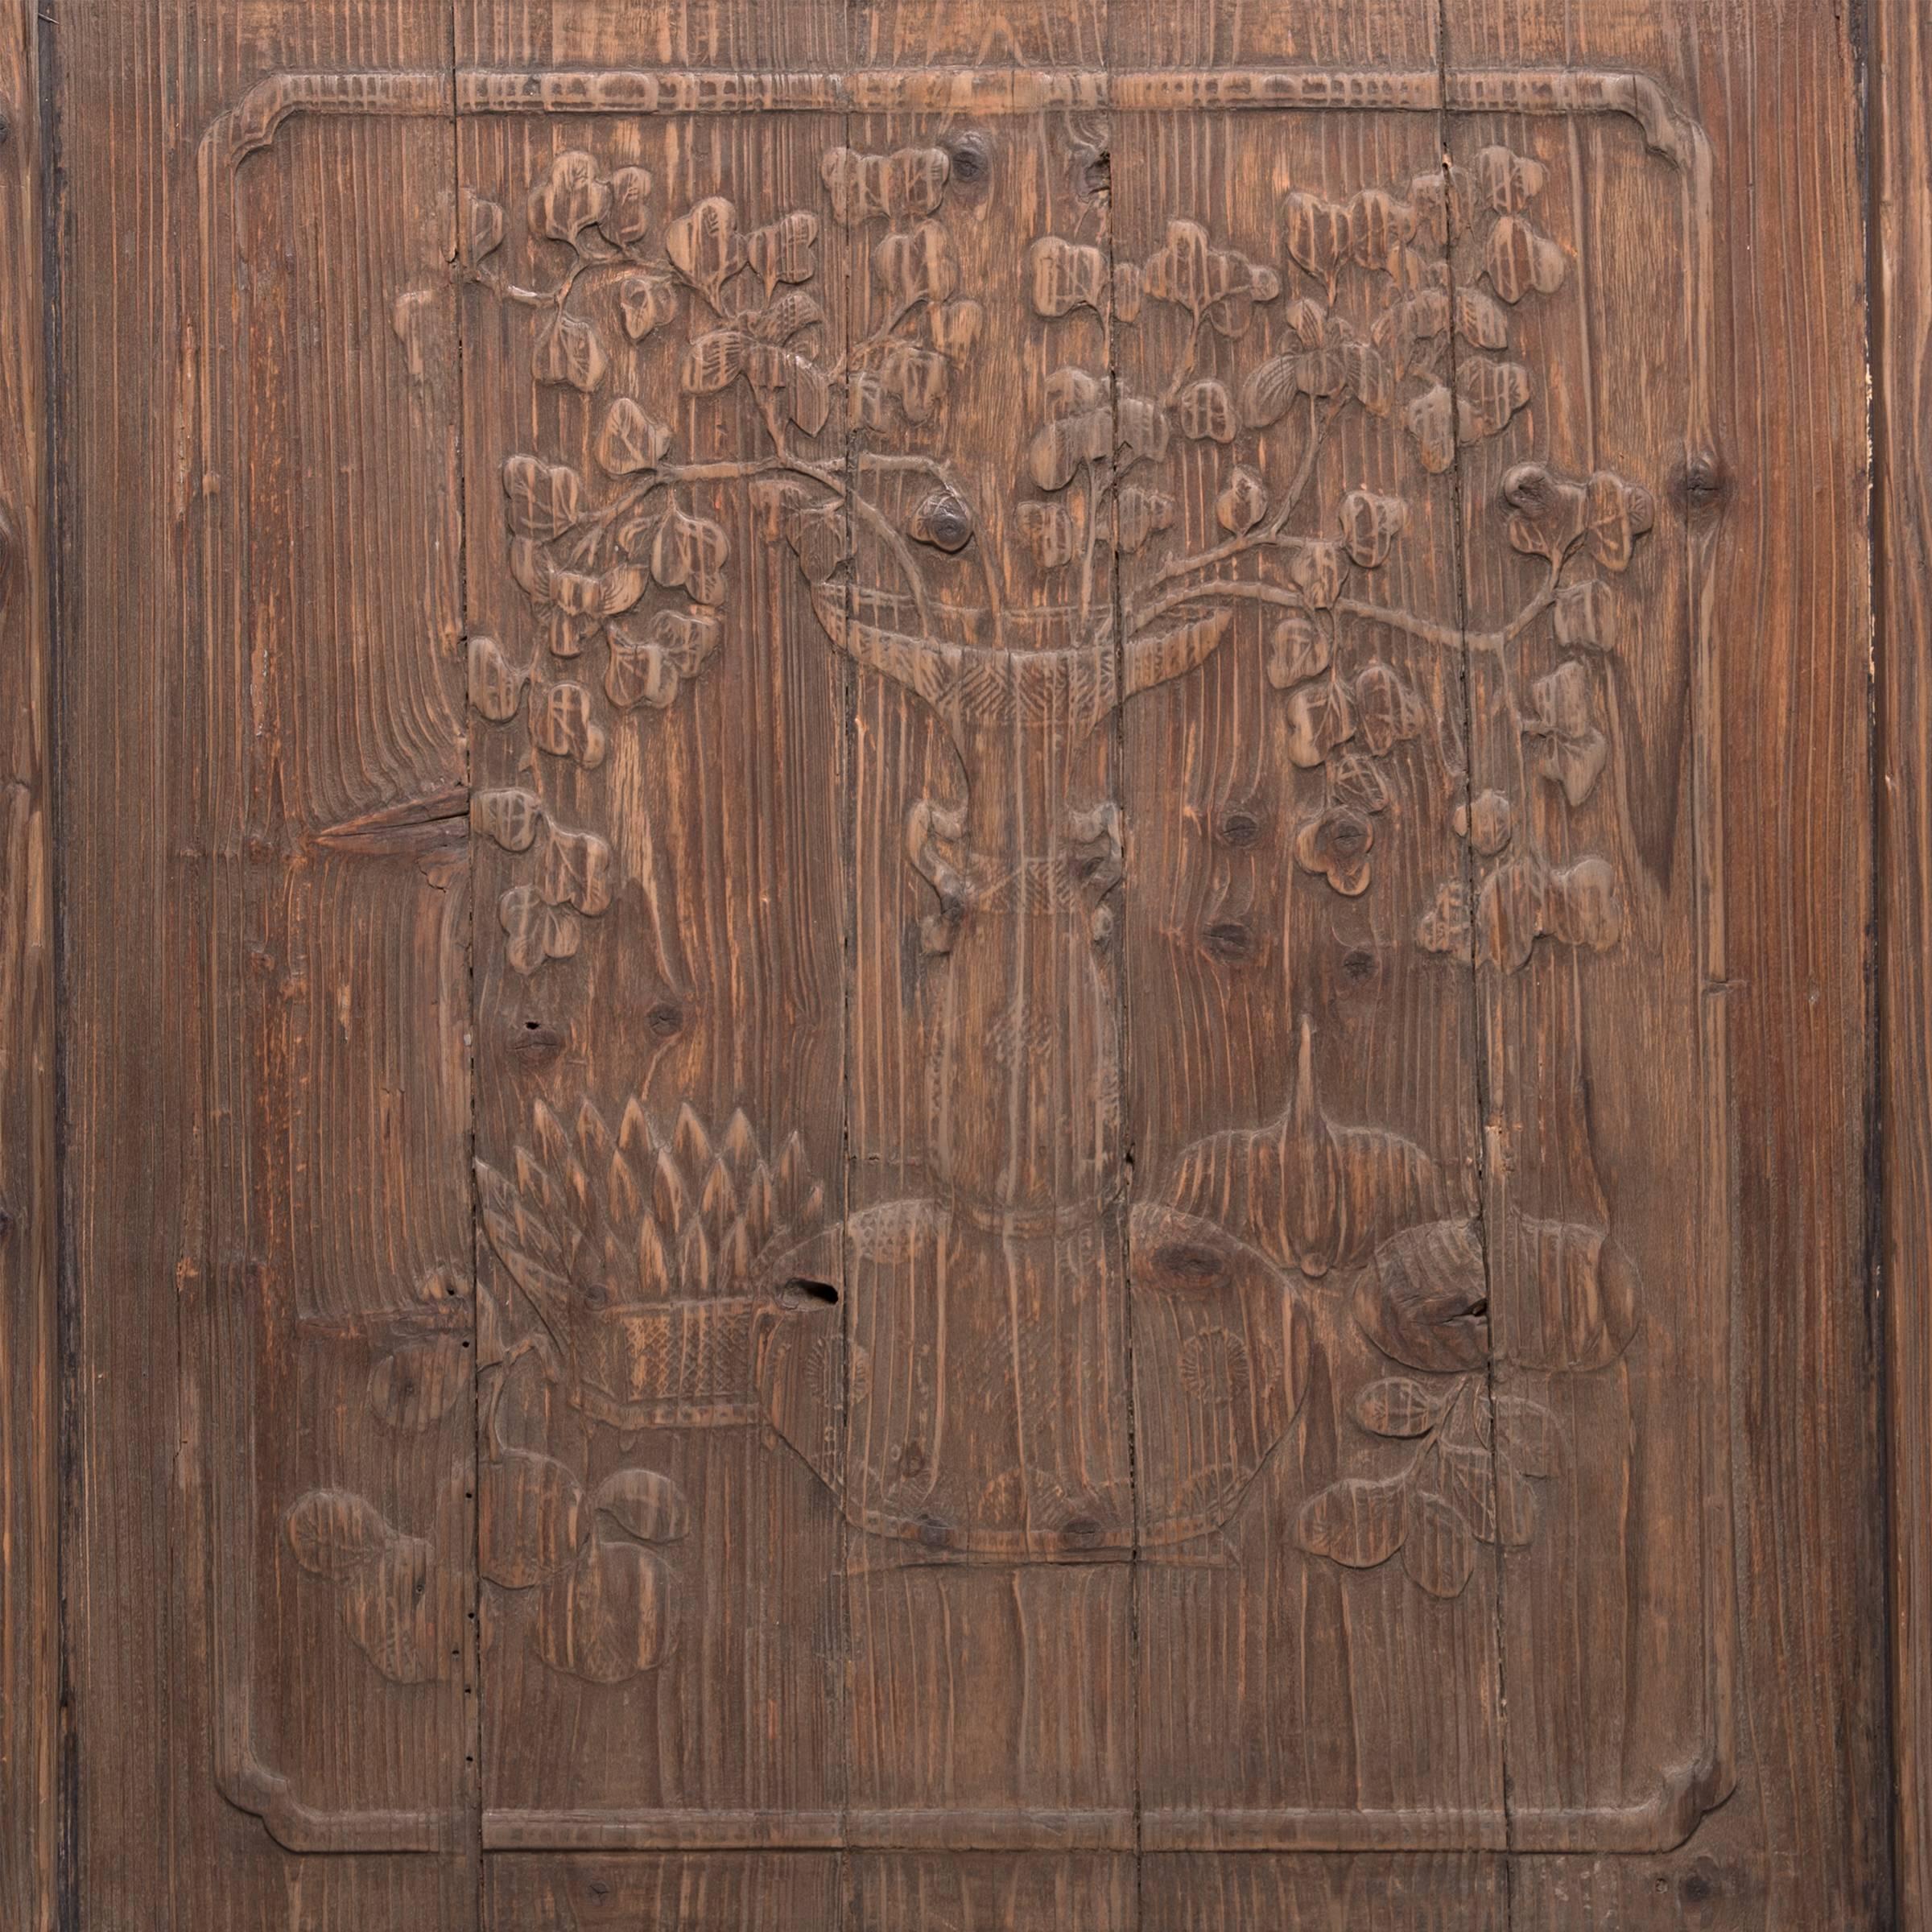 It’s difficult to pinpoint what makes this handcrafted panel so impressive: the artful relief carvings of seasonal fruit and lush, foliage-filled vases or the spruce wood’s prominent and expressive grain. Both are beautifully preserved in this